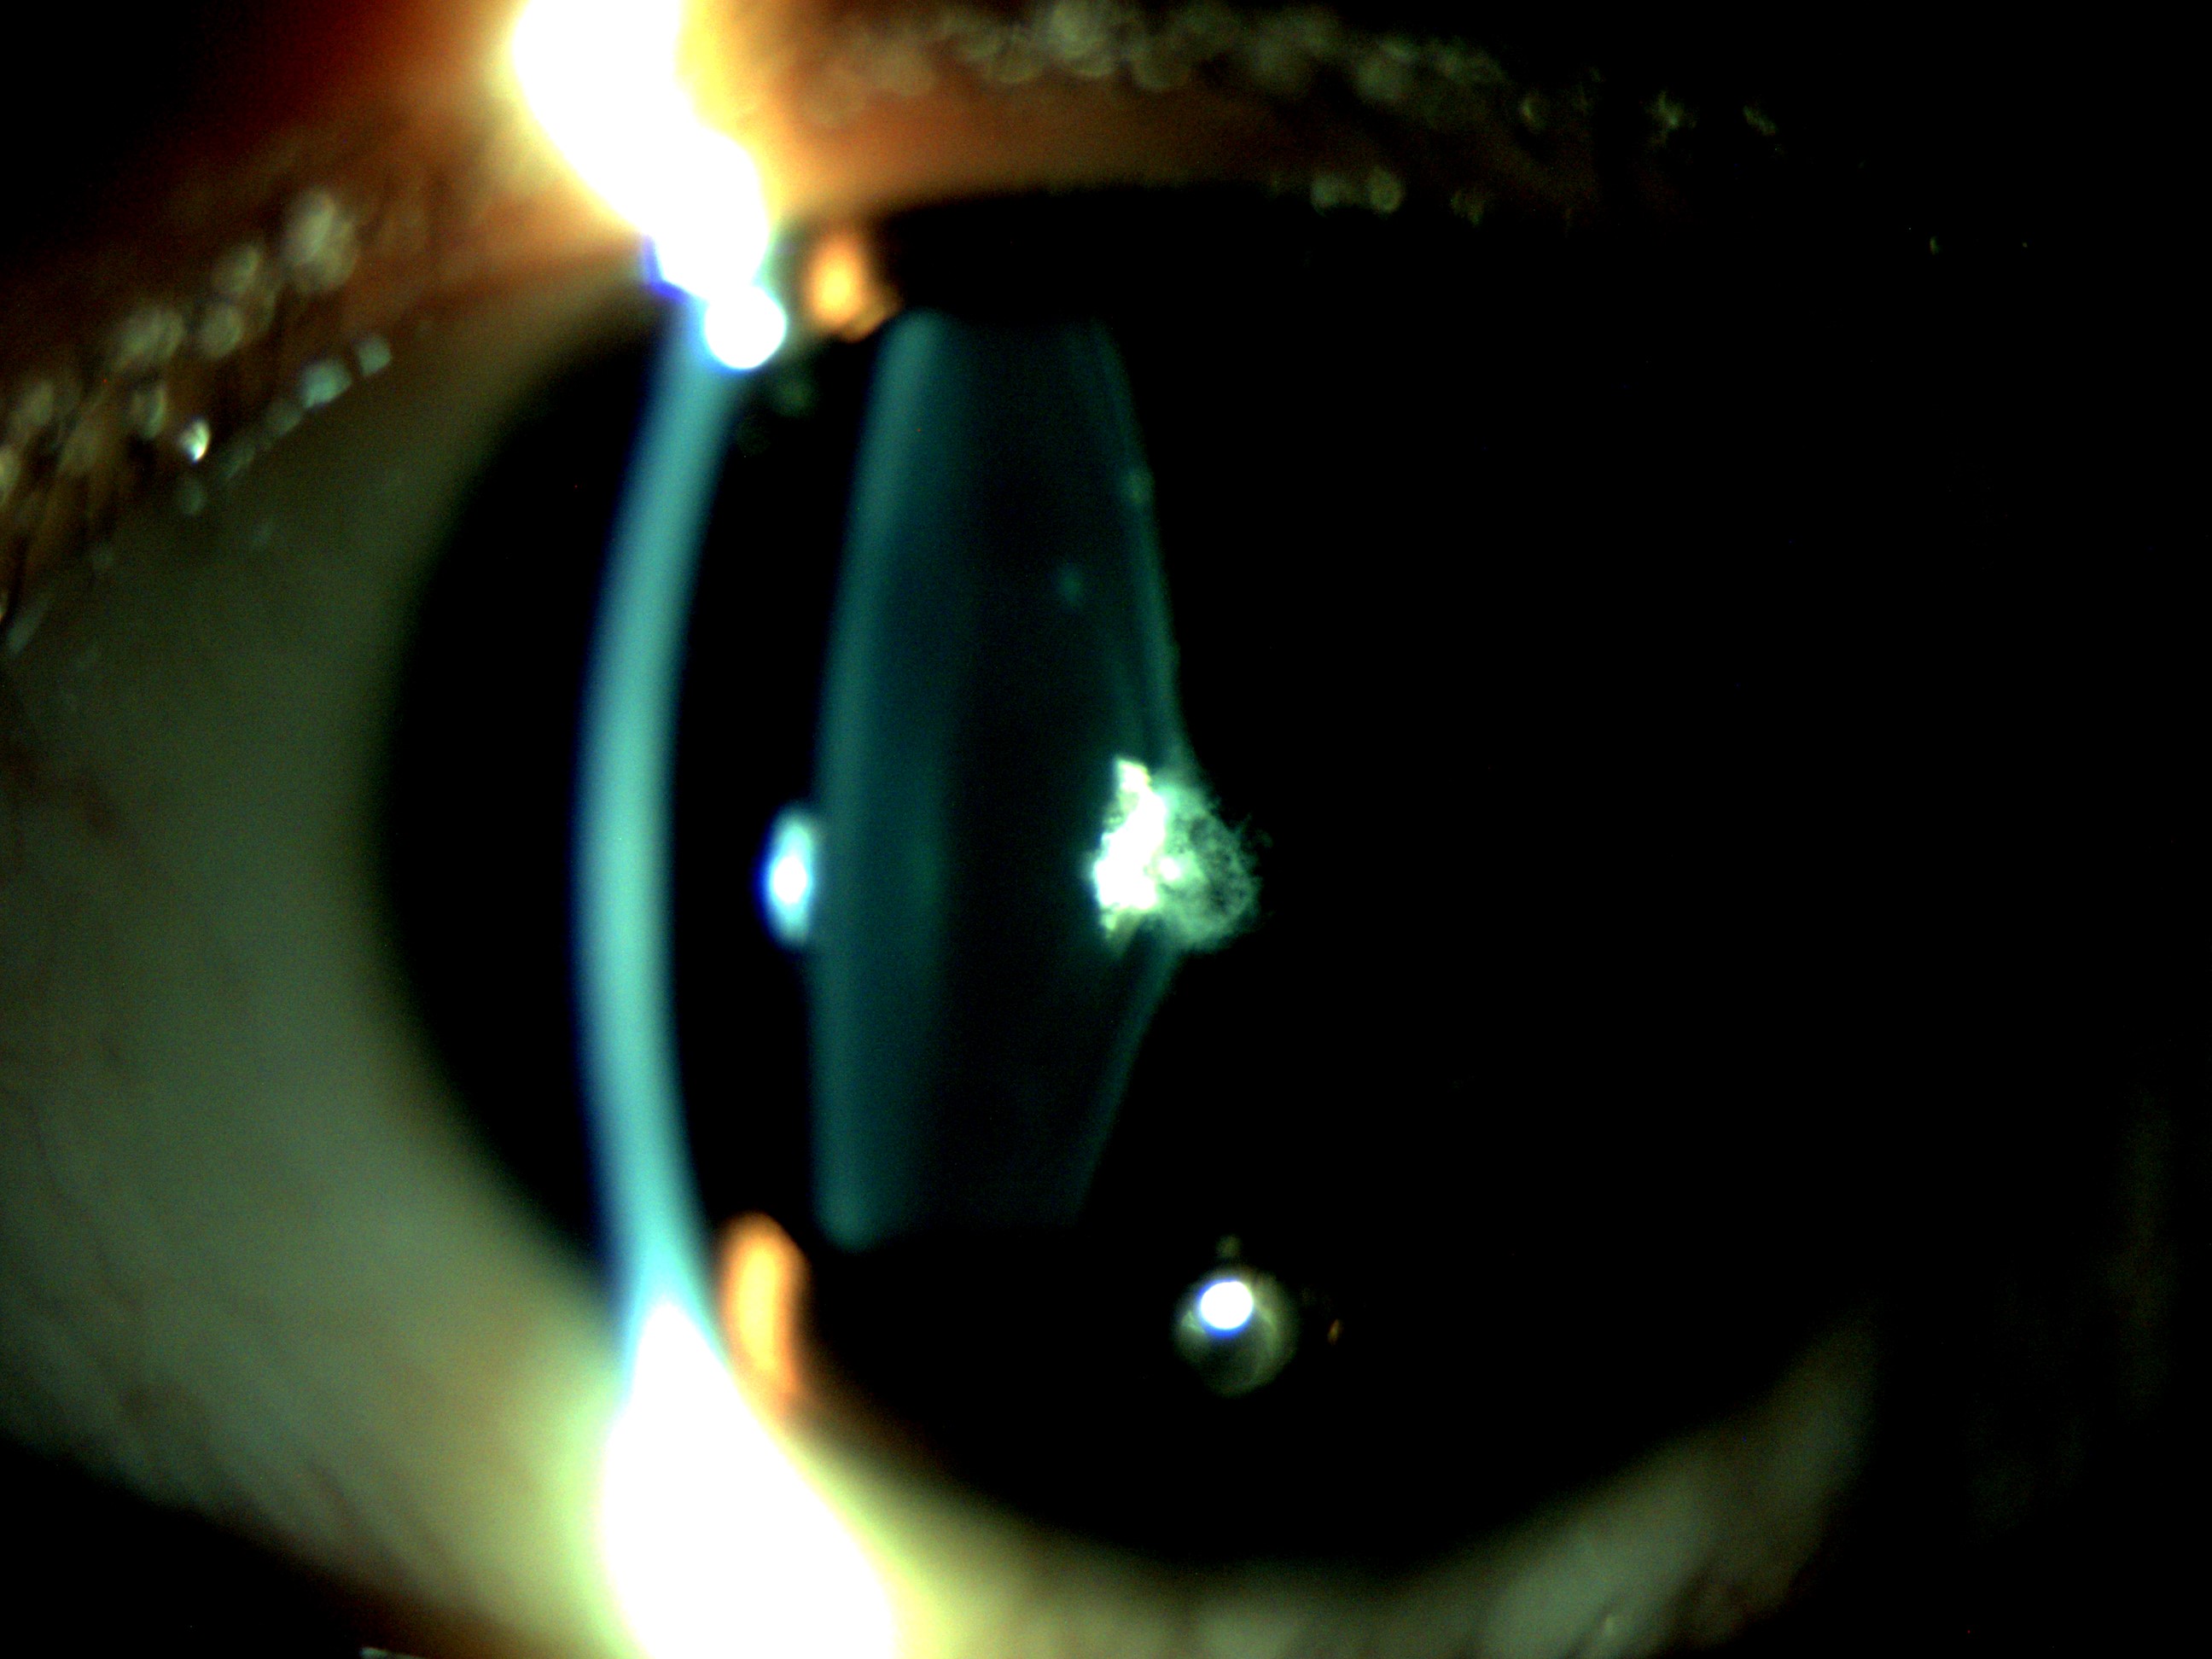 Pediatric cataract. Posterior lenticonus. This slit lamp photograph shows posterior lenticonus variety of pediatric cataract. These, being close to the nodal point of eye affect visual acuity more than its anterior counterpart. Lowe syndrome is frequently associated with posterior lenticonus.